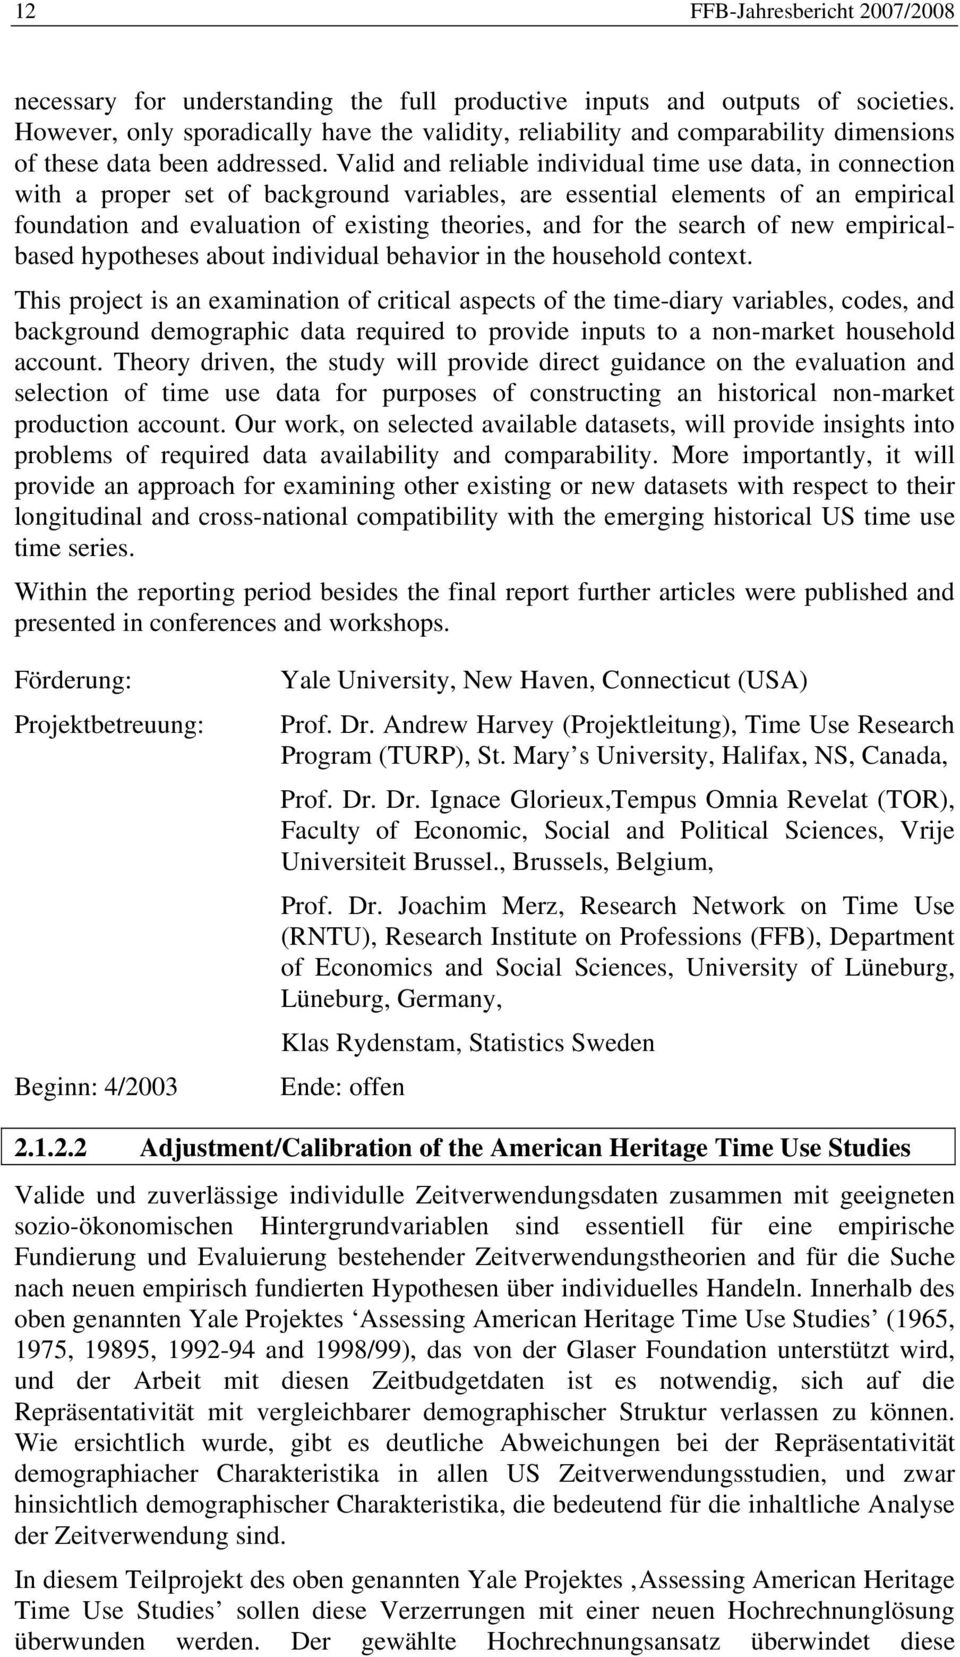 Valid and reliable individual time use data, in connection with a proper set of background variables, are essential elements of an empirical foundation and evaluation of existing theories, and for